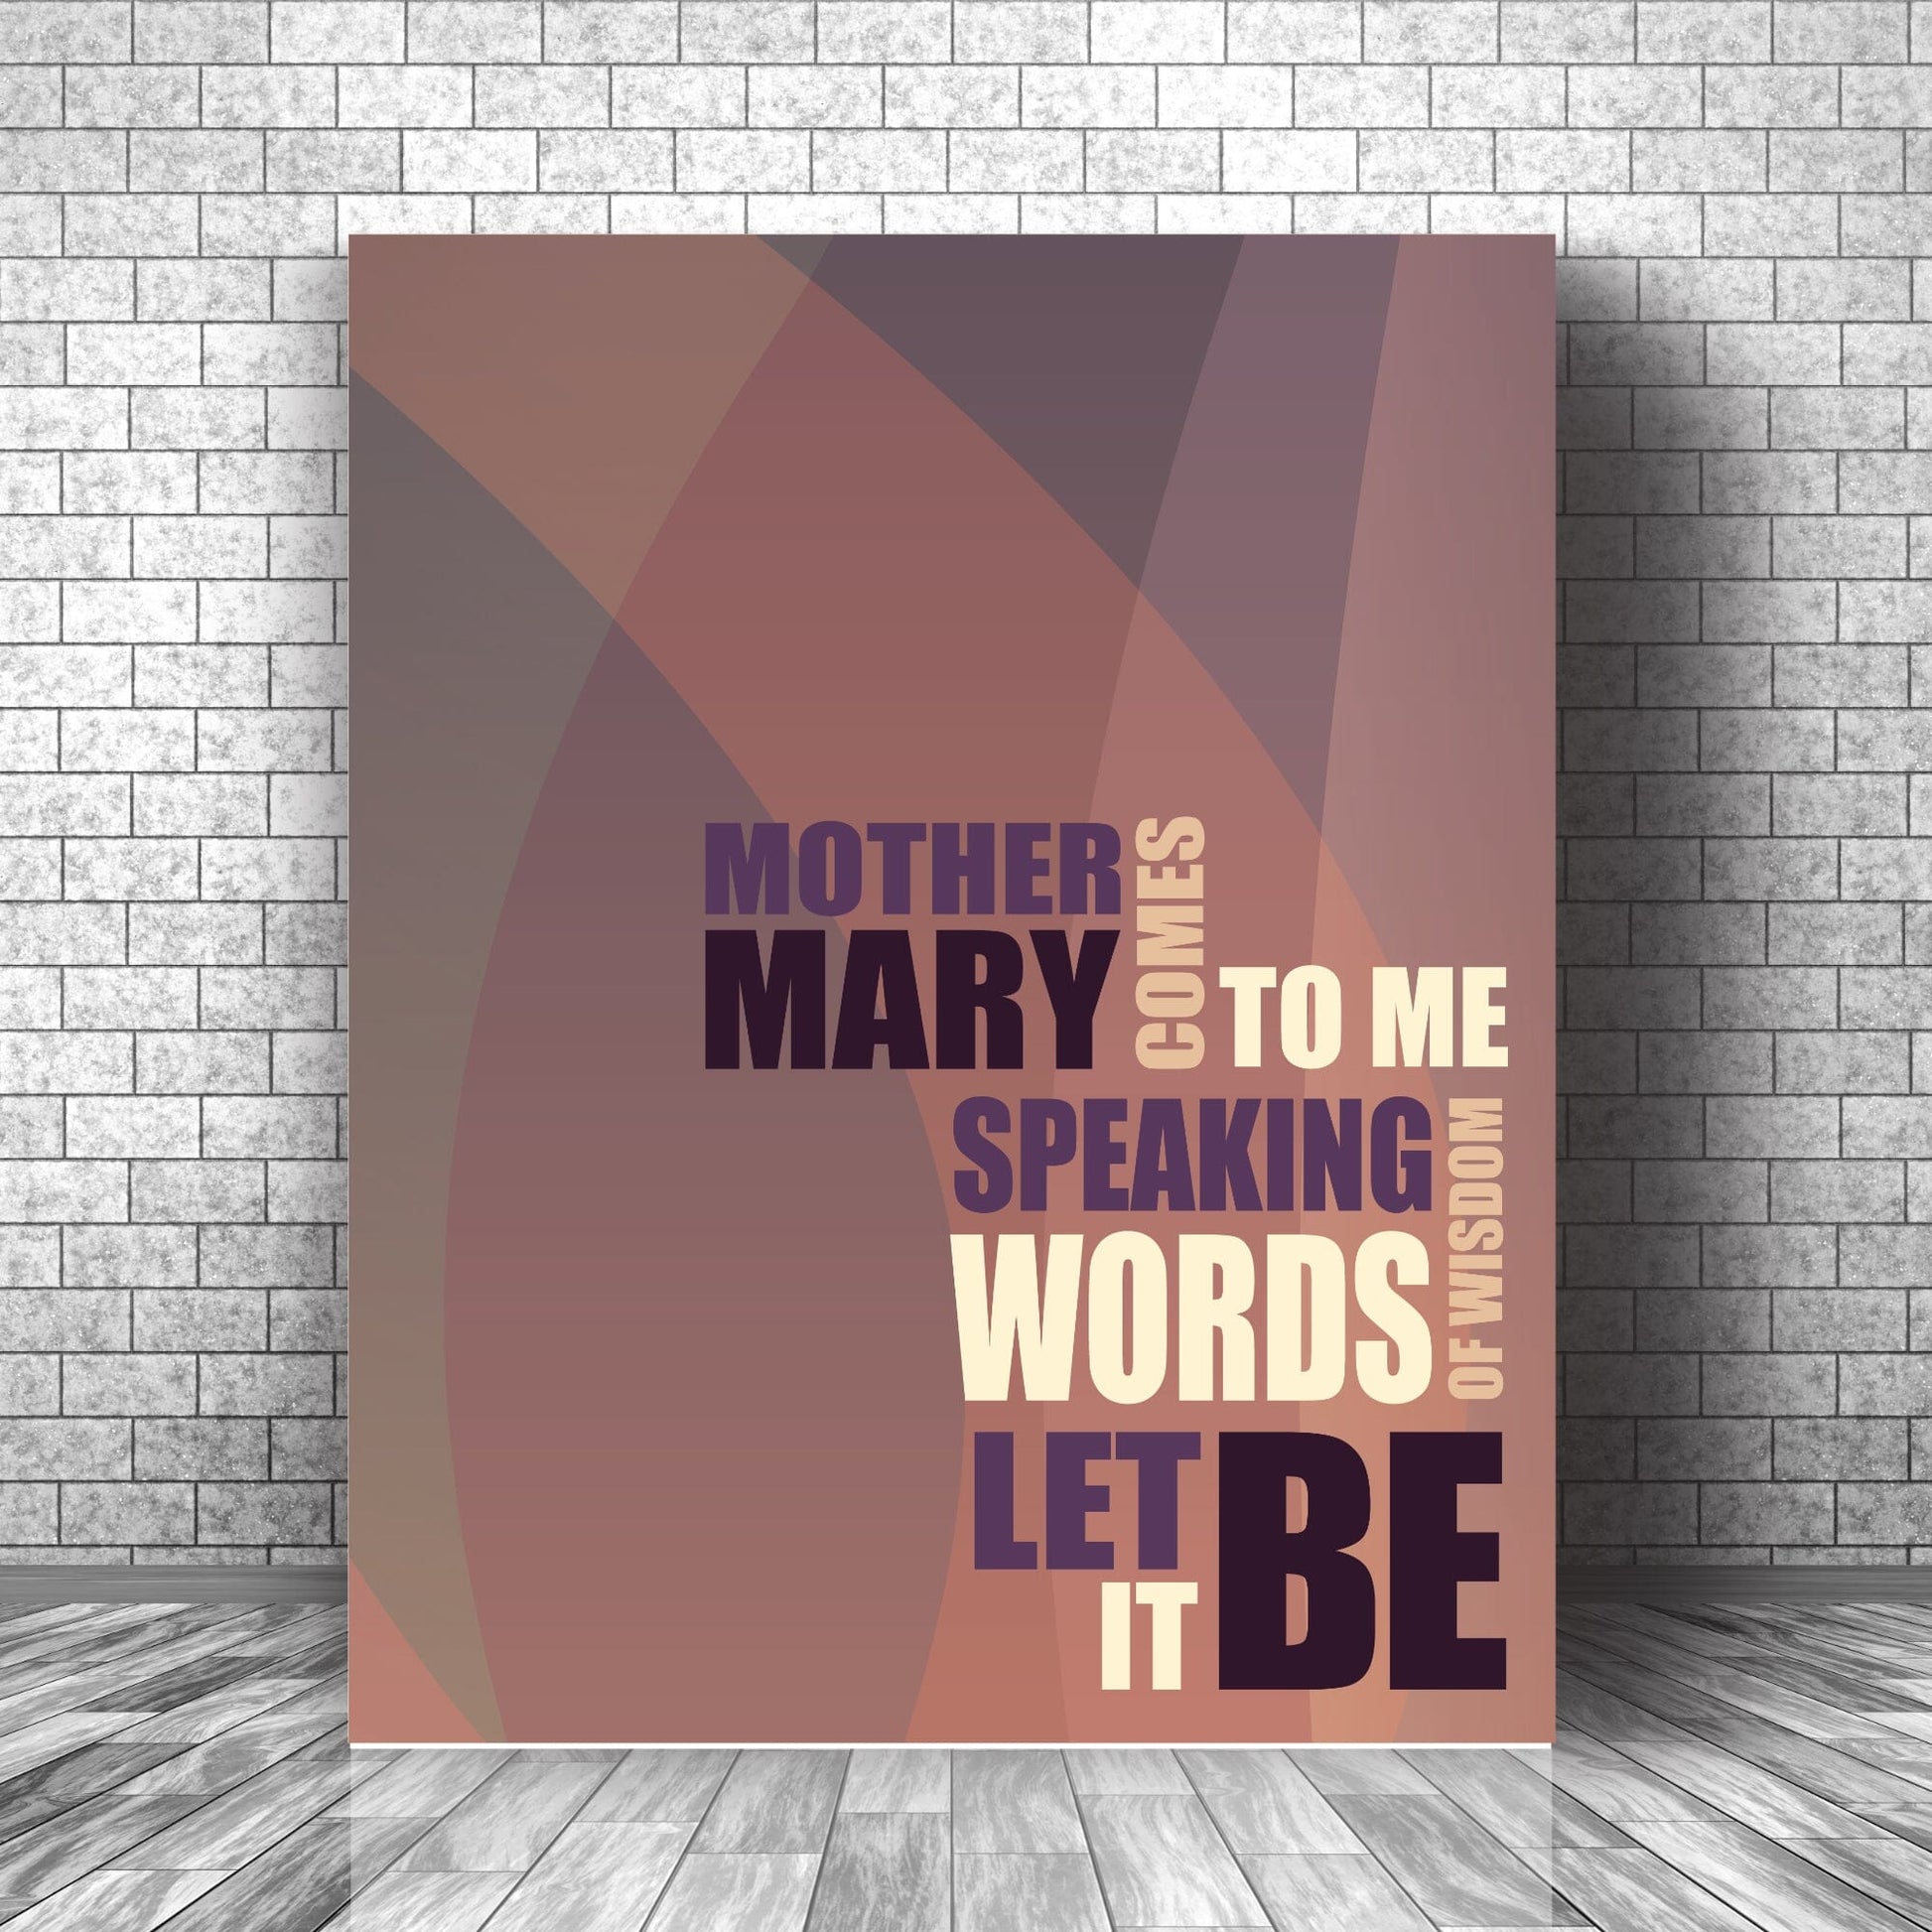 Let It Be by the Beatles - Wall Music Song Lyric Art Print Song Lyrics Art Song Lyrics Art 